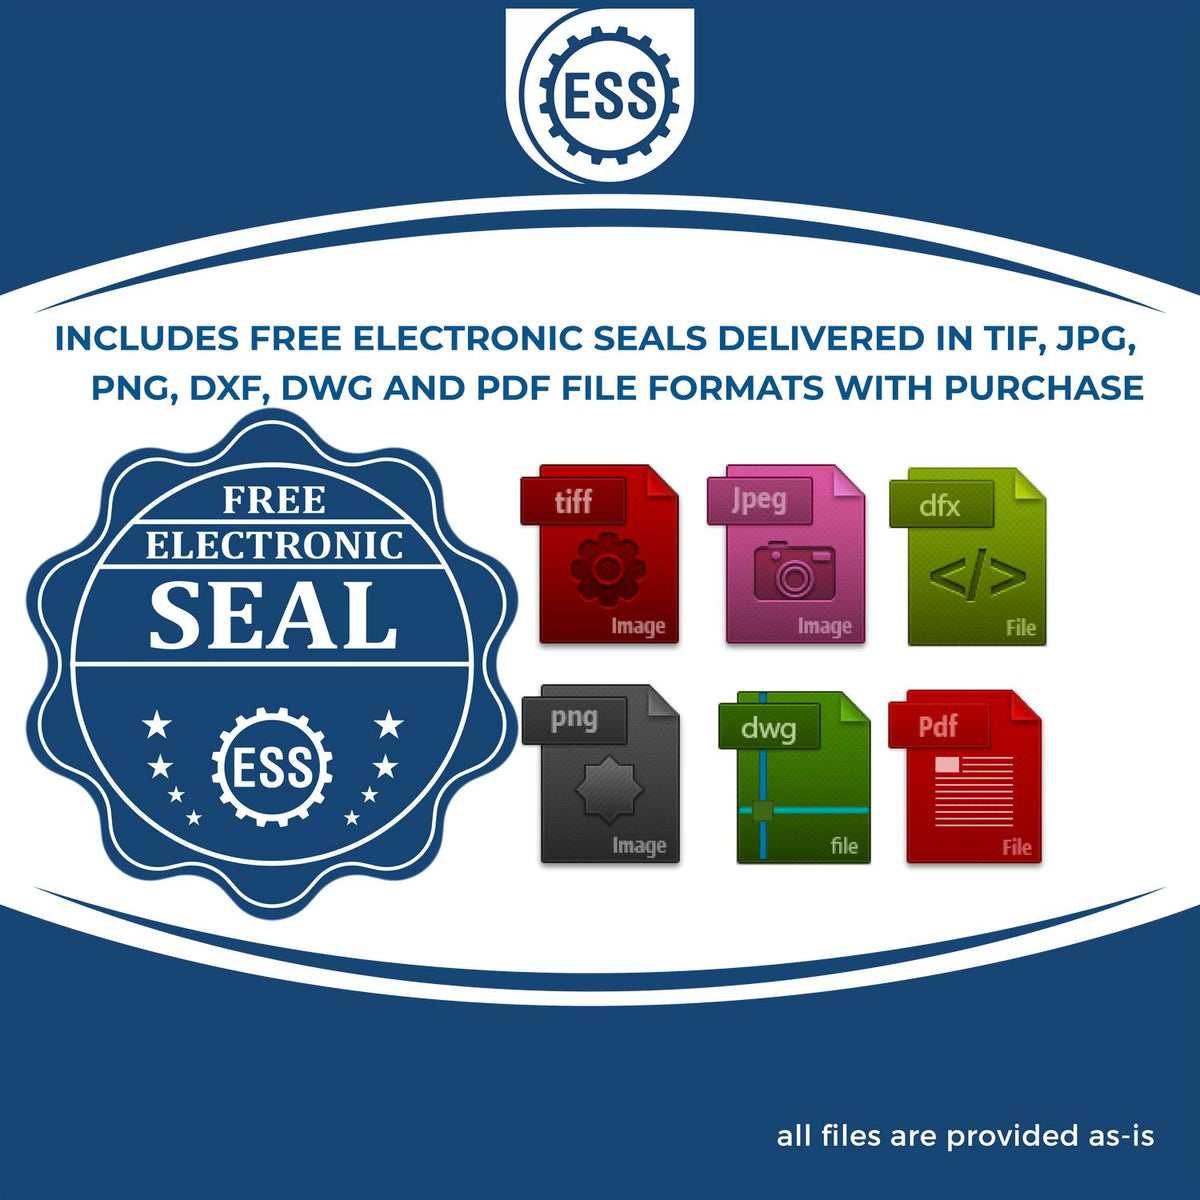 An infographic for the free electronic seal for the Wooden Handle Indiana Rectangular Notary Public Stamp illustrating the different file type icons such as DXF, DWG, TIF, JPG and PNG.